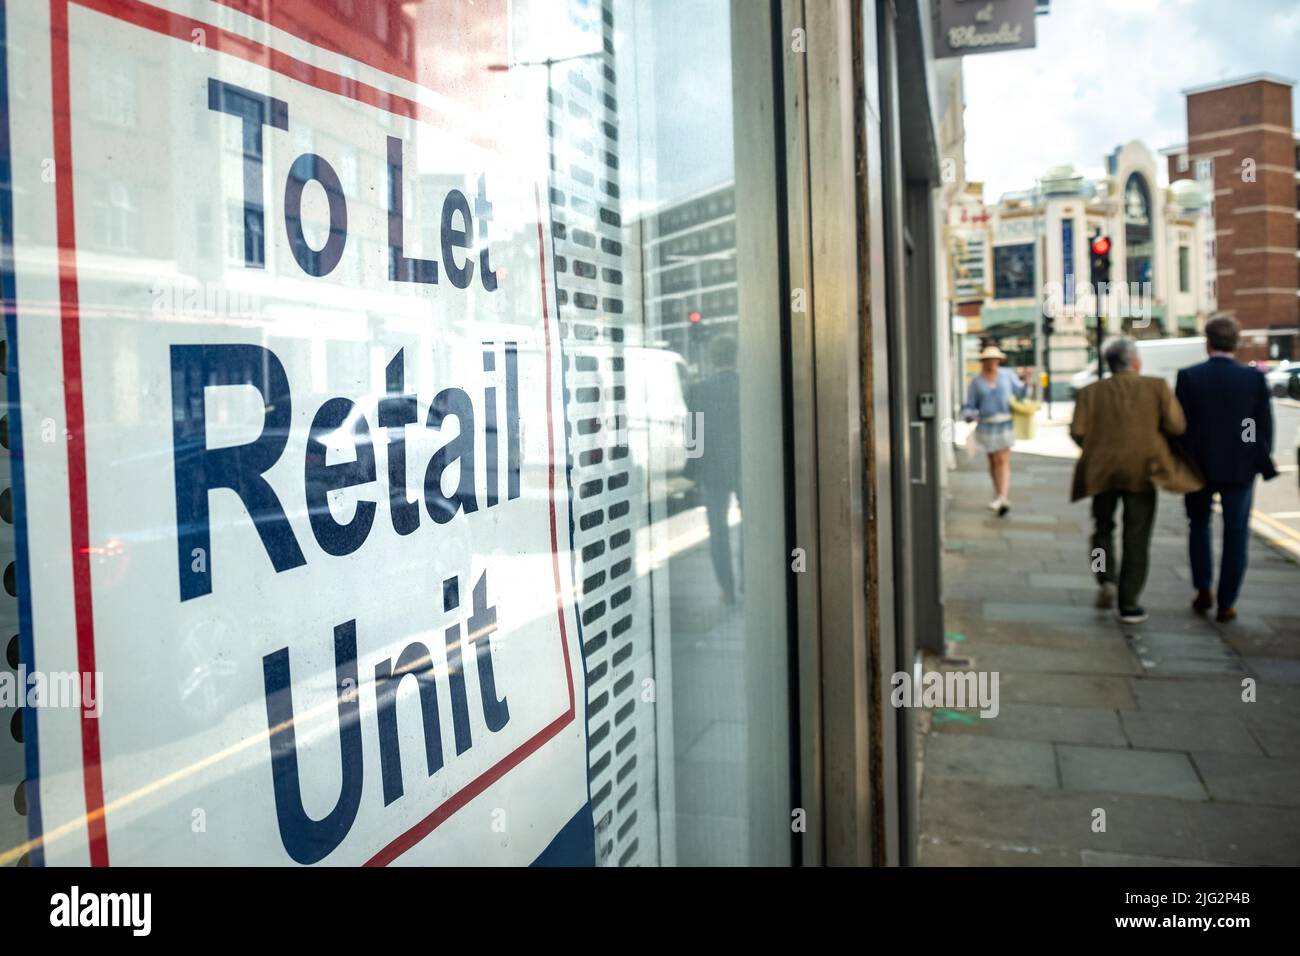 London- Shop window with sign saying 'To Let Retail Unit' Stock Photo